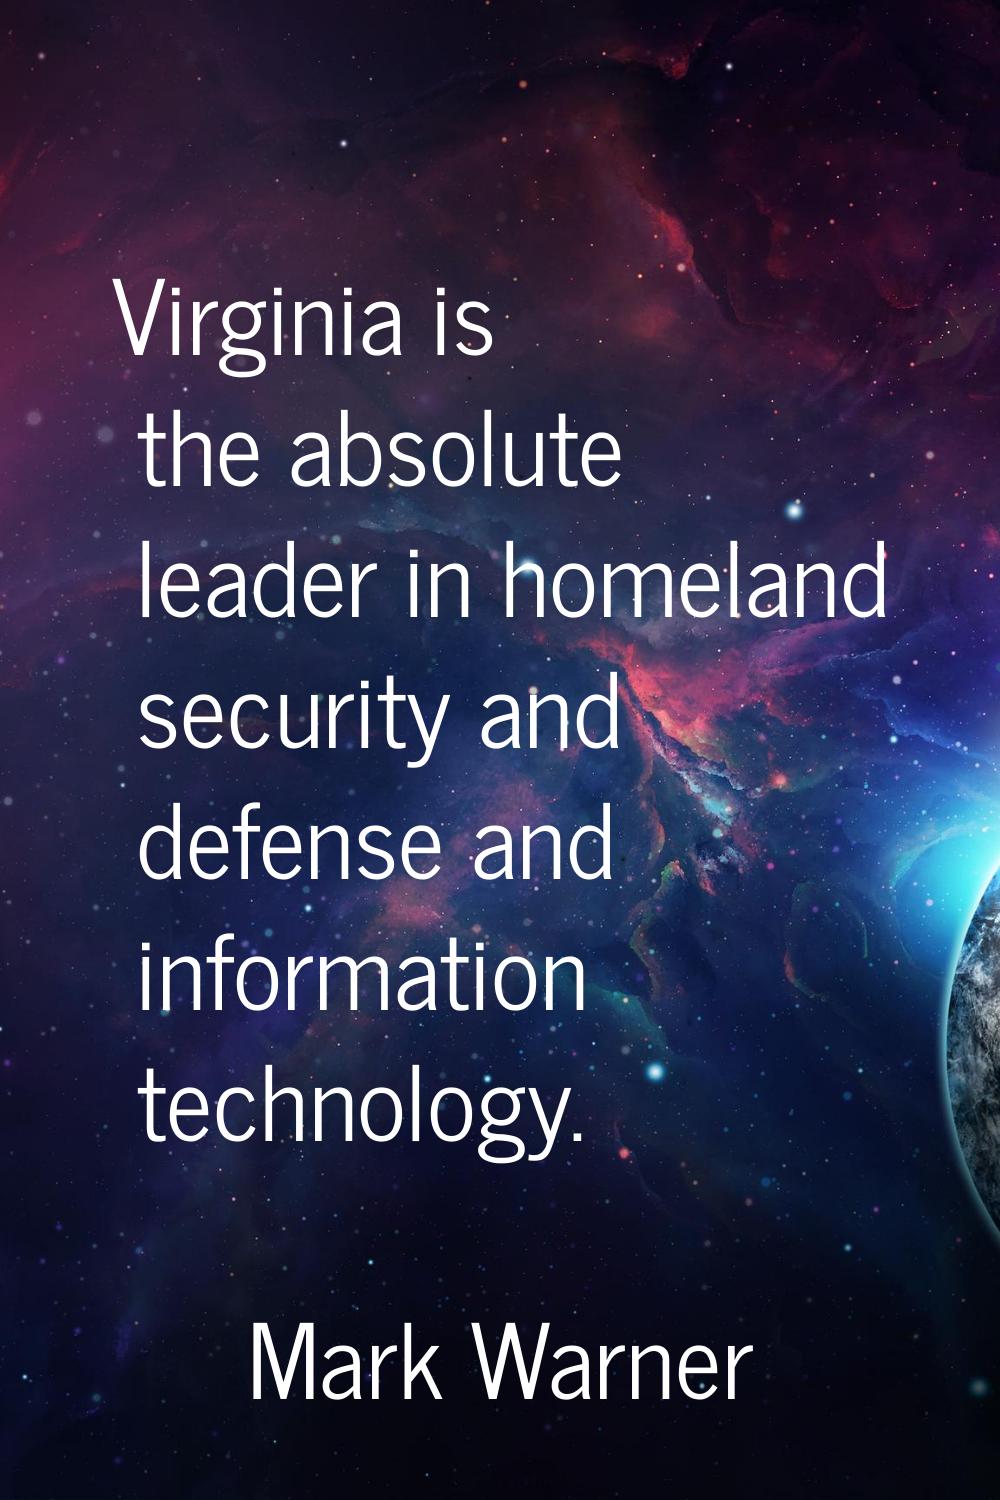 Virginia is the absolute leader in homeland security and defense and information technology.